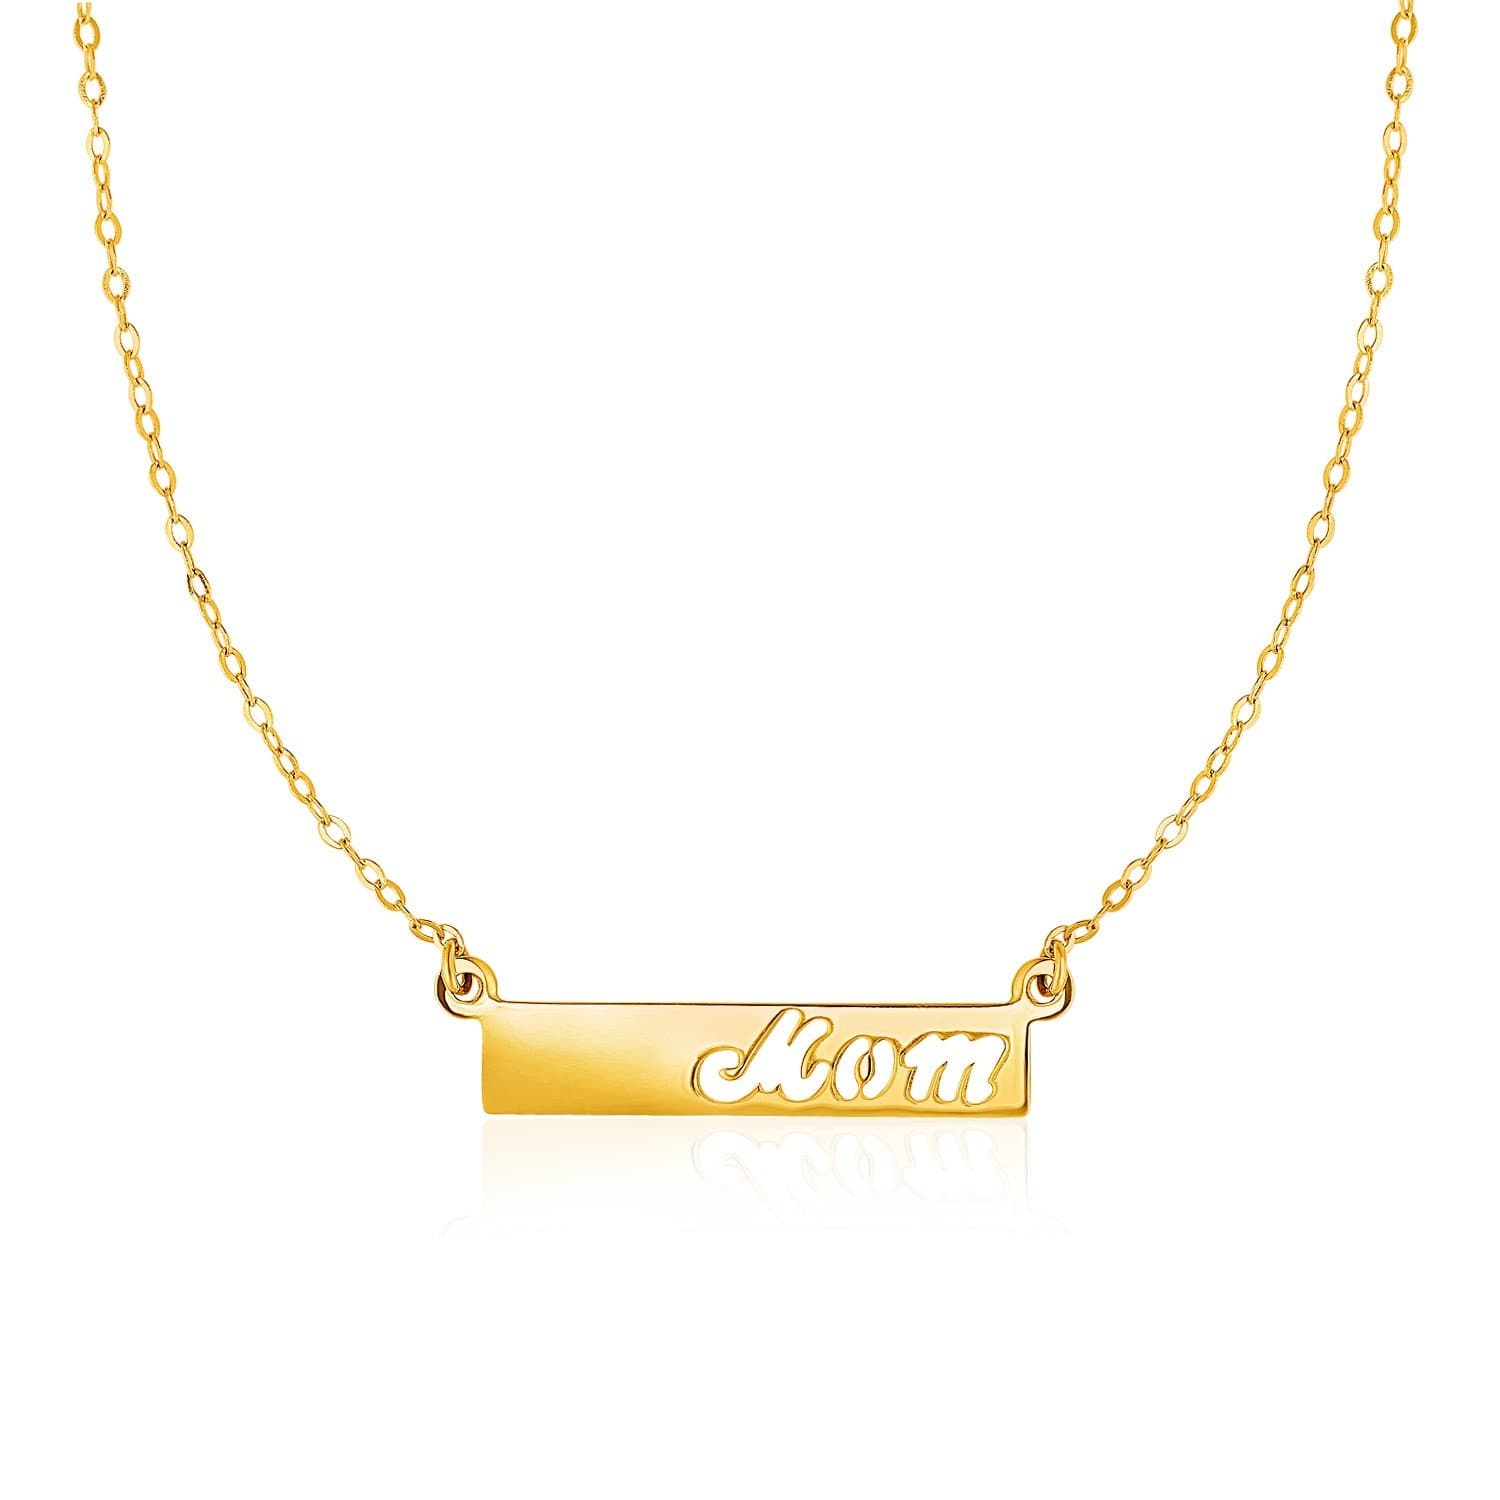 14K Yellow Gold Pendant with  inchesMom inches on Horizontal Bar